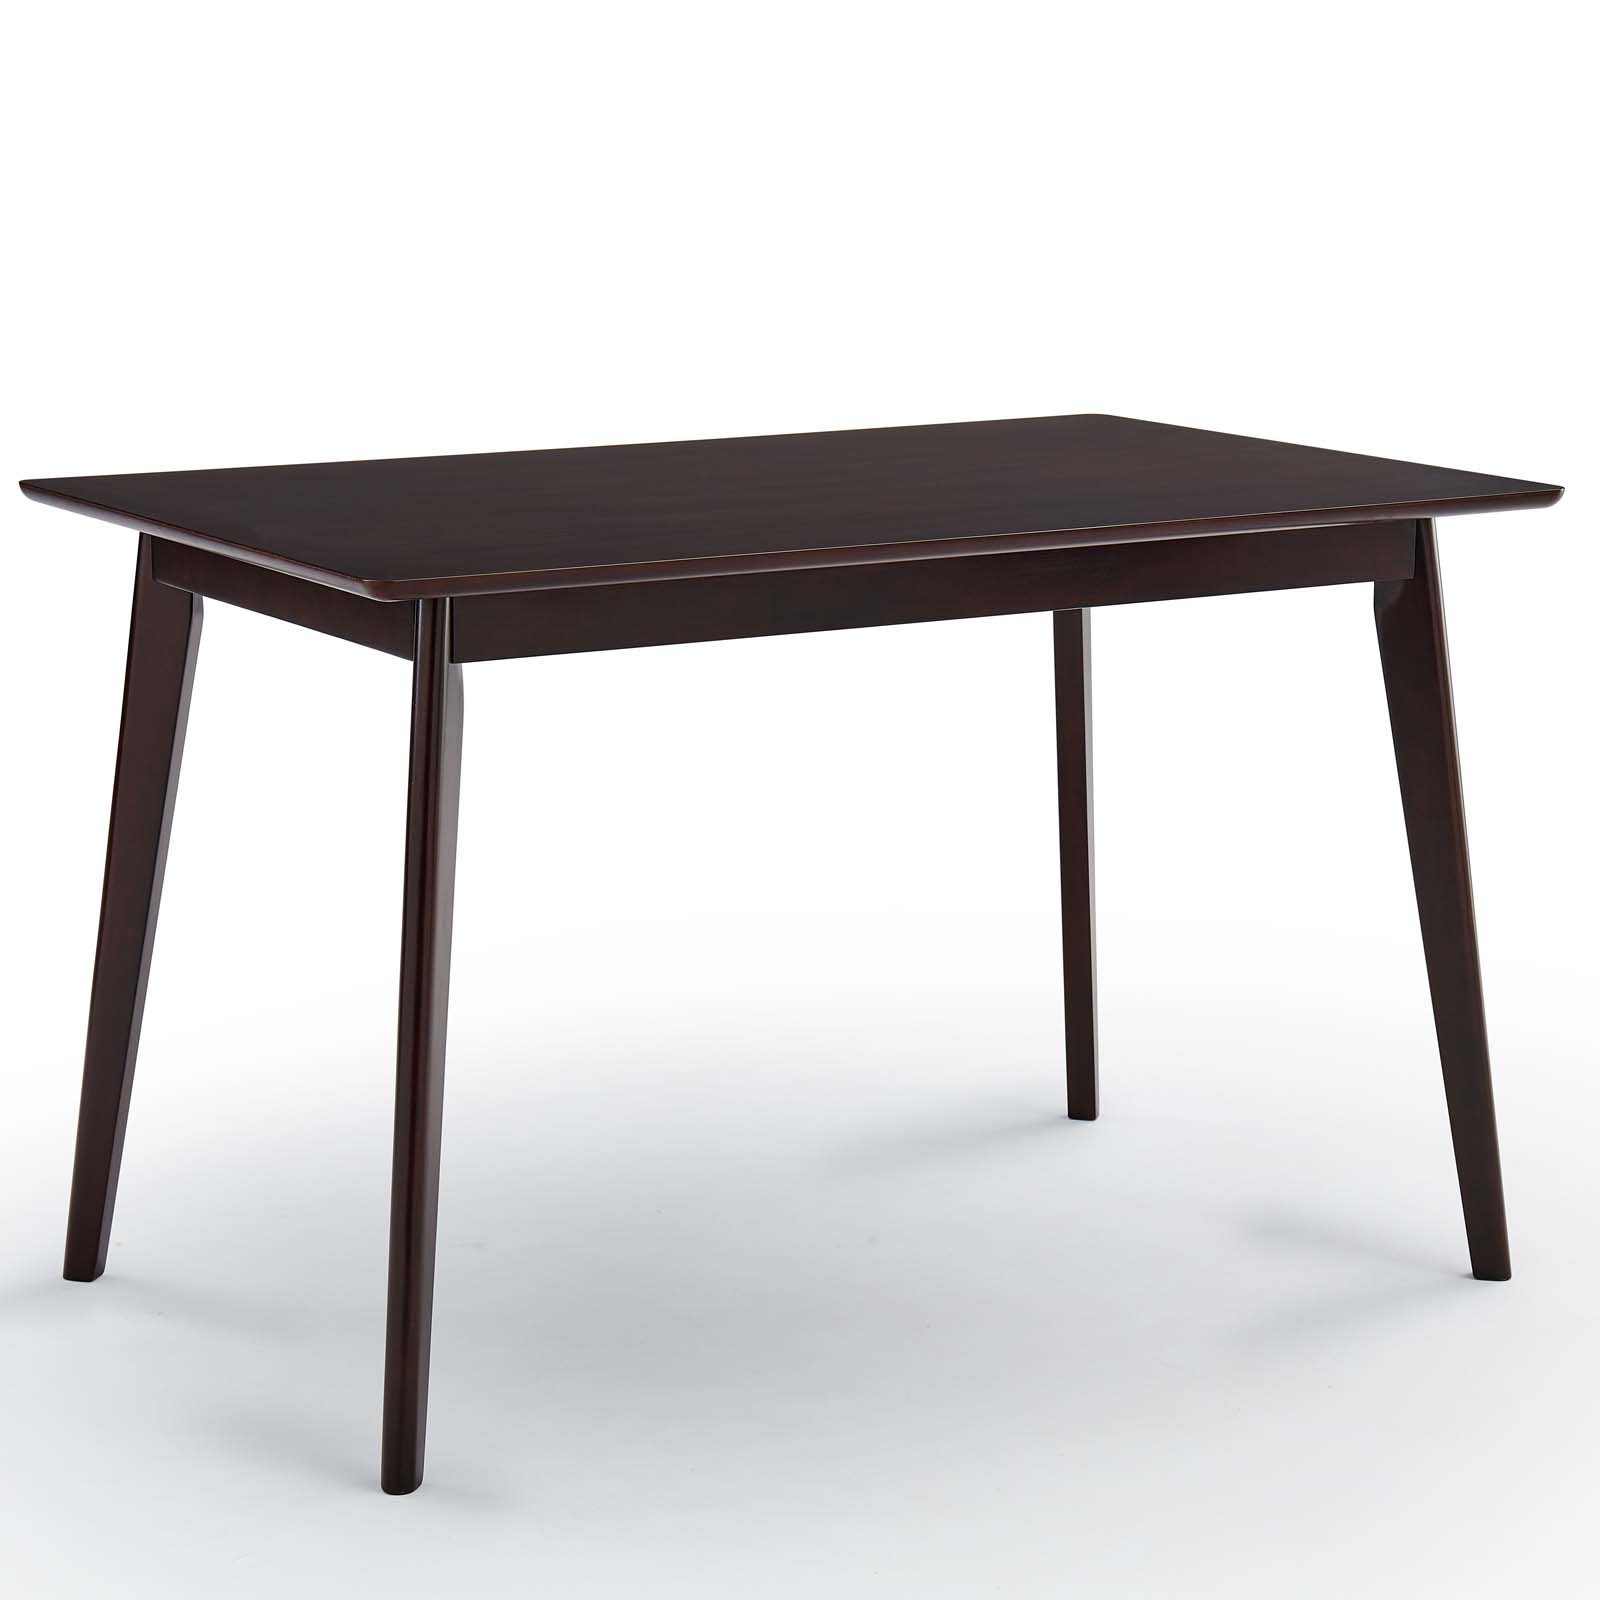 Oracle 47 Inch Rectangle Dining Table in Cappuccino